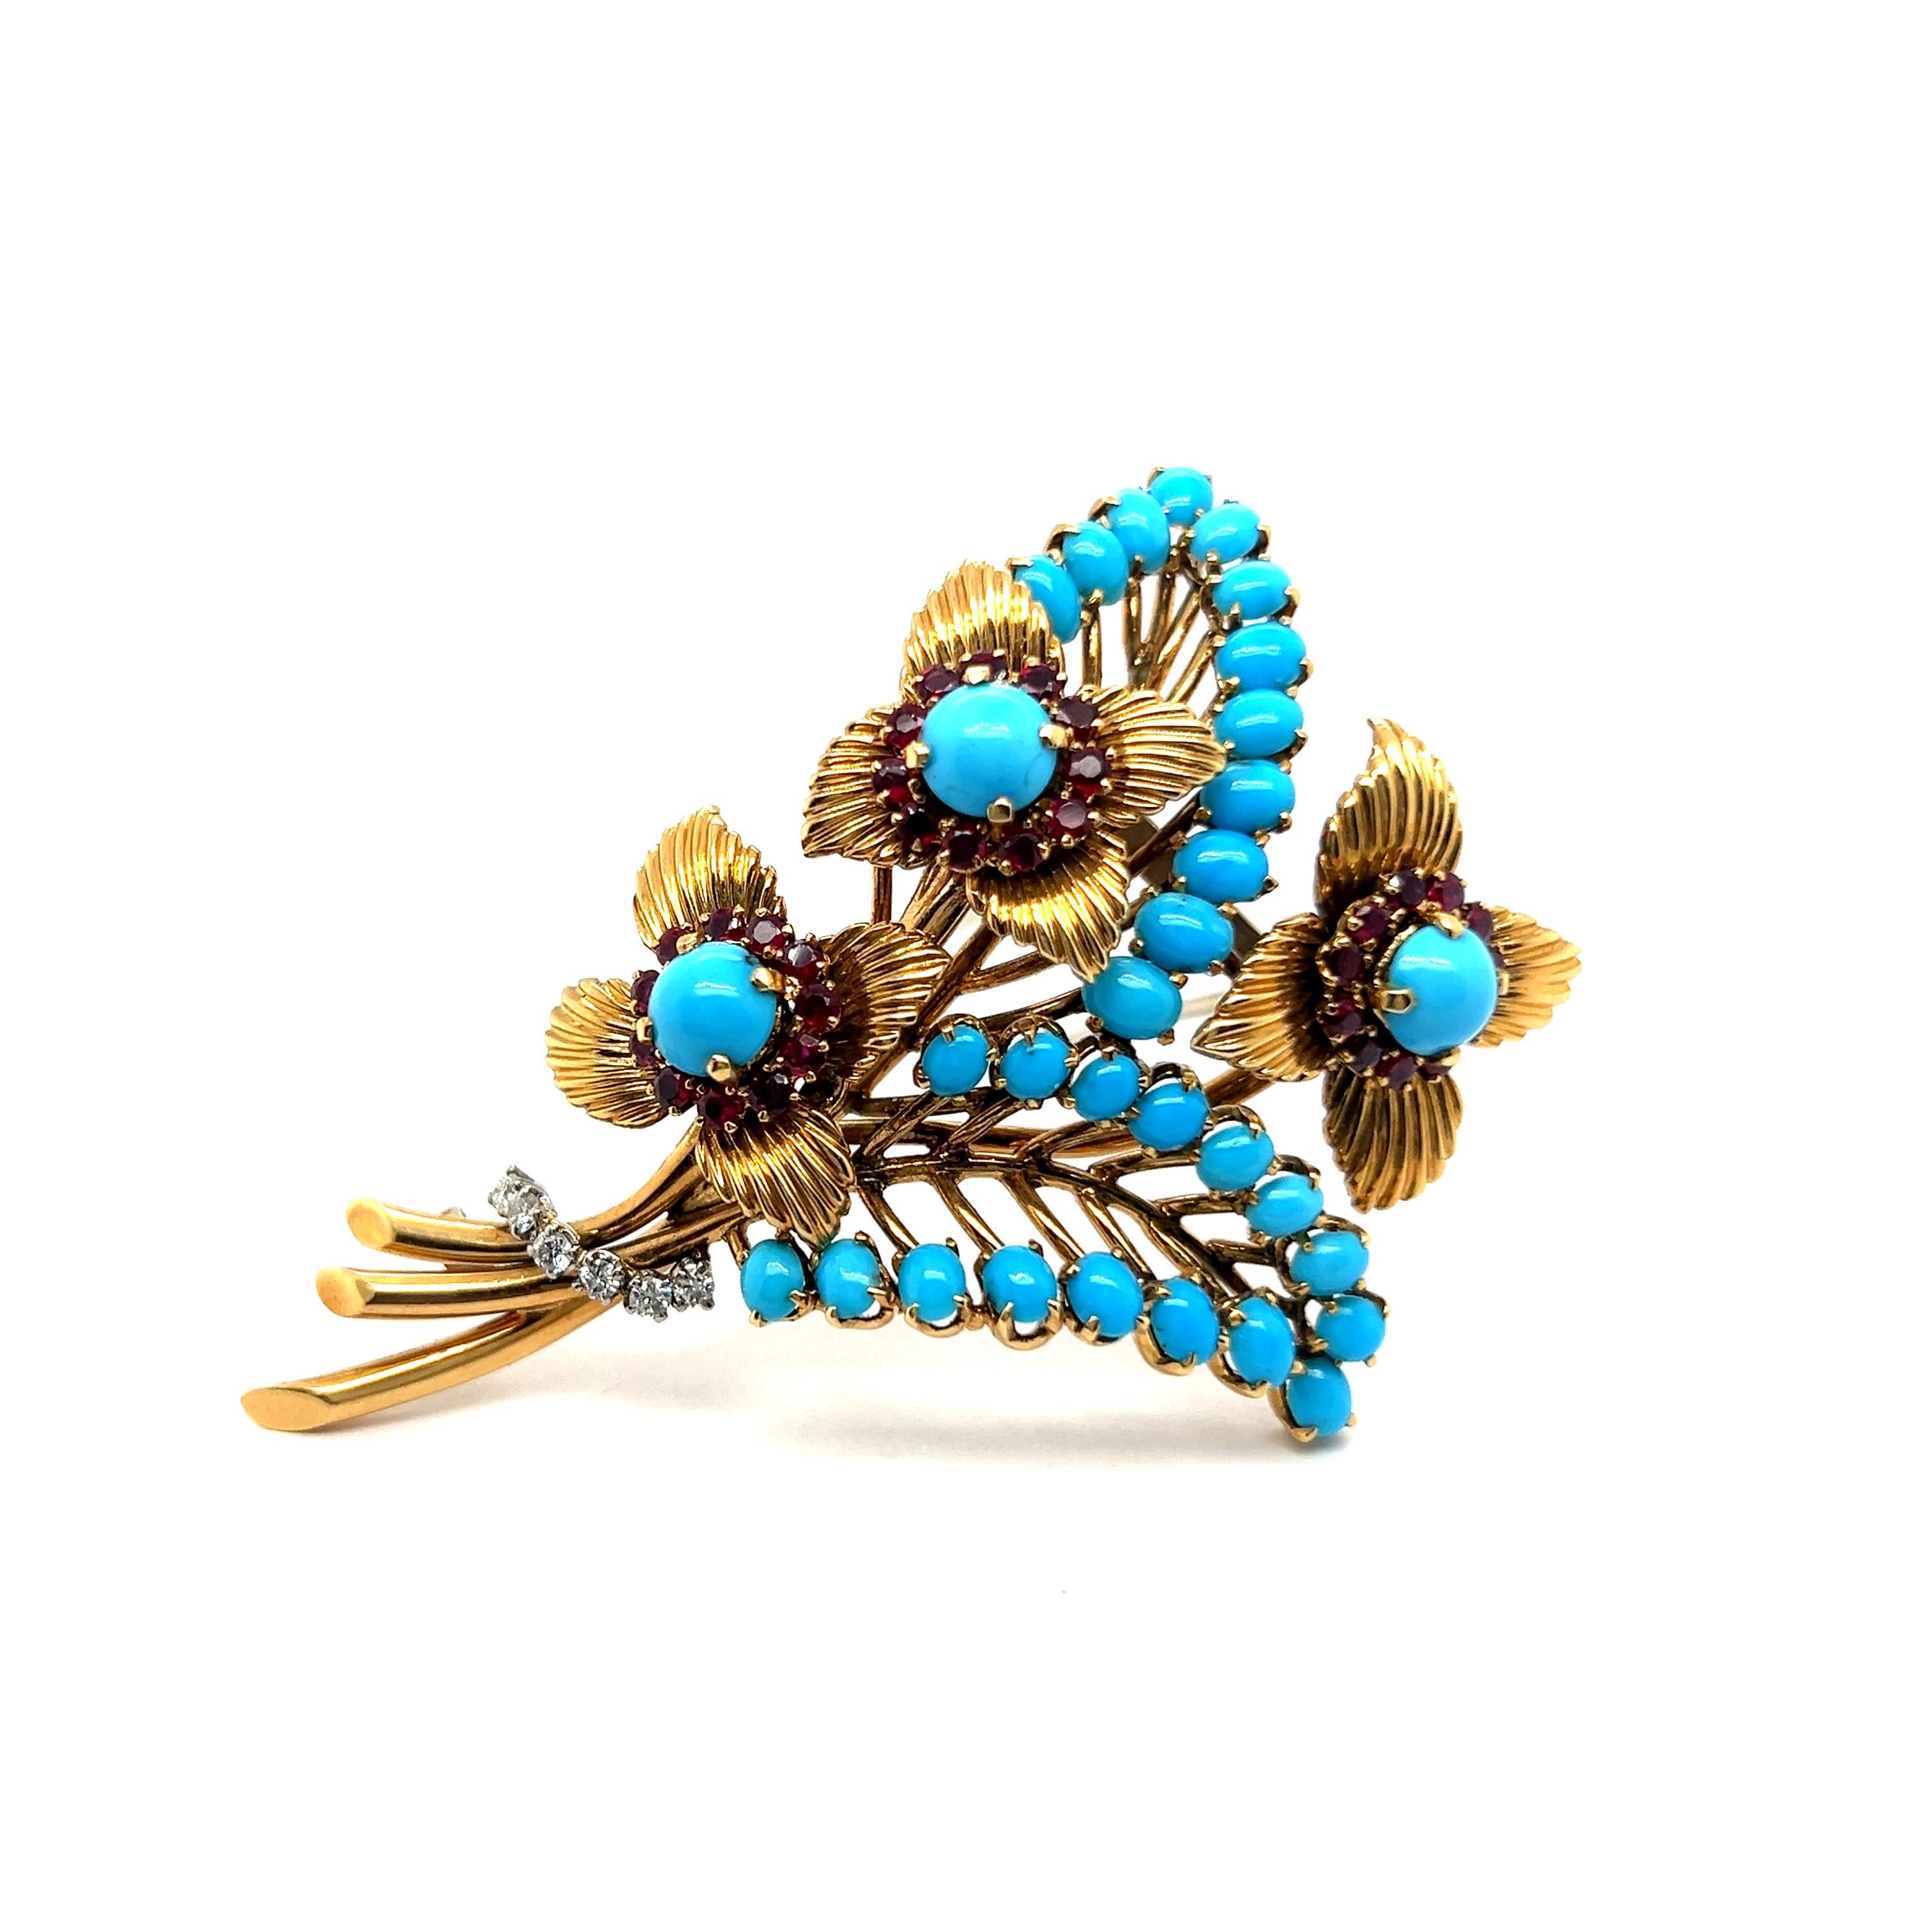 Brooch with Turquoise, Rubies & Diamonds in 18 Karat Yellow Gold by Gübelin In Good Condition For Sale In Lucerne, CH